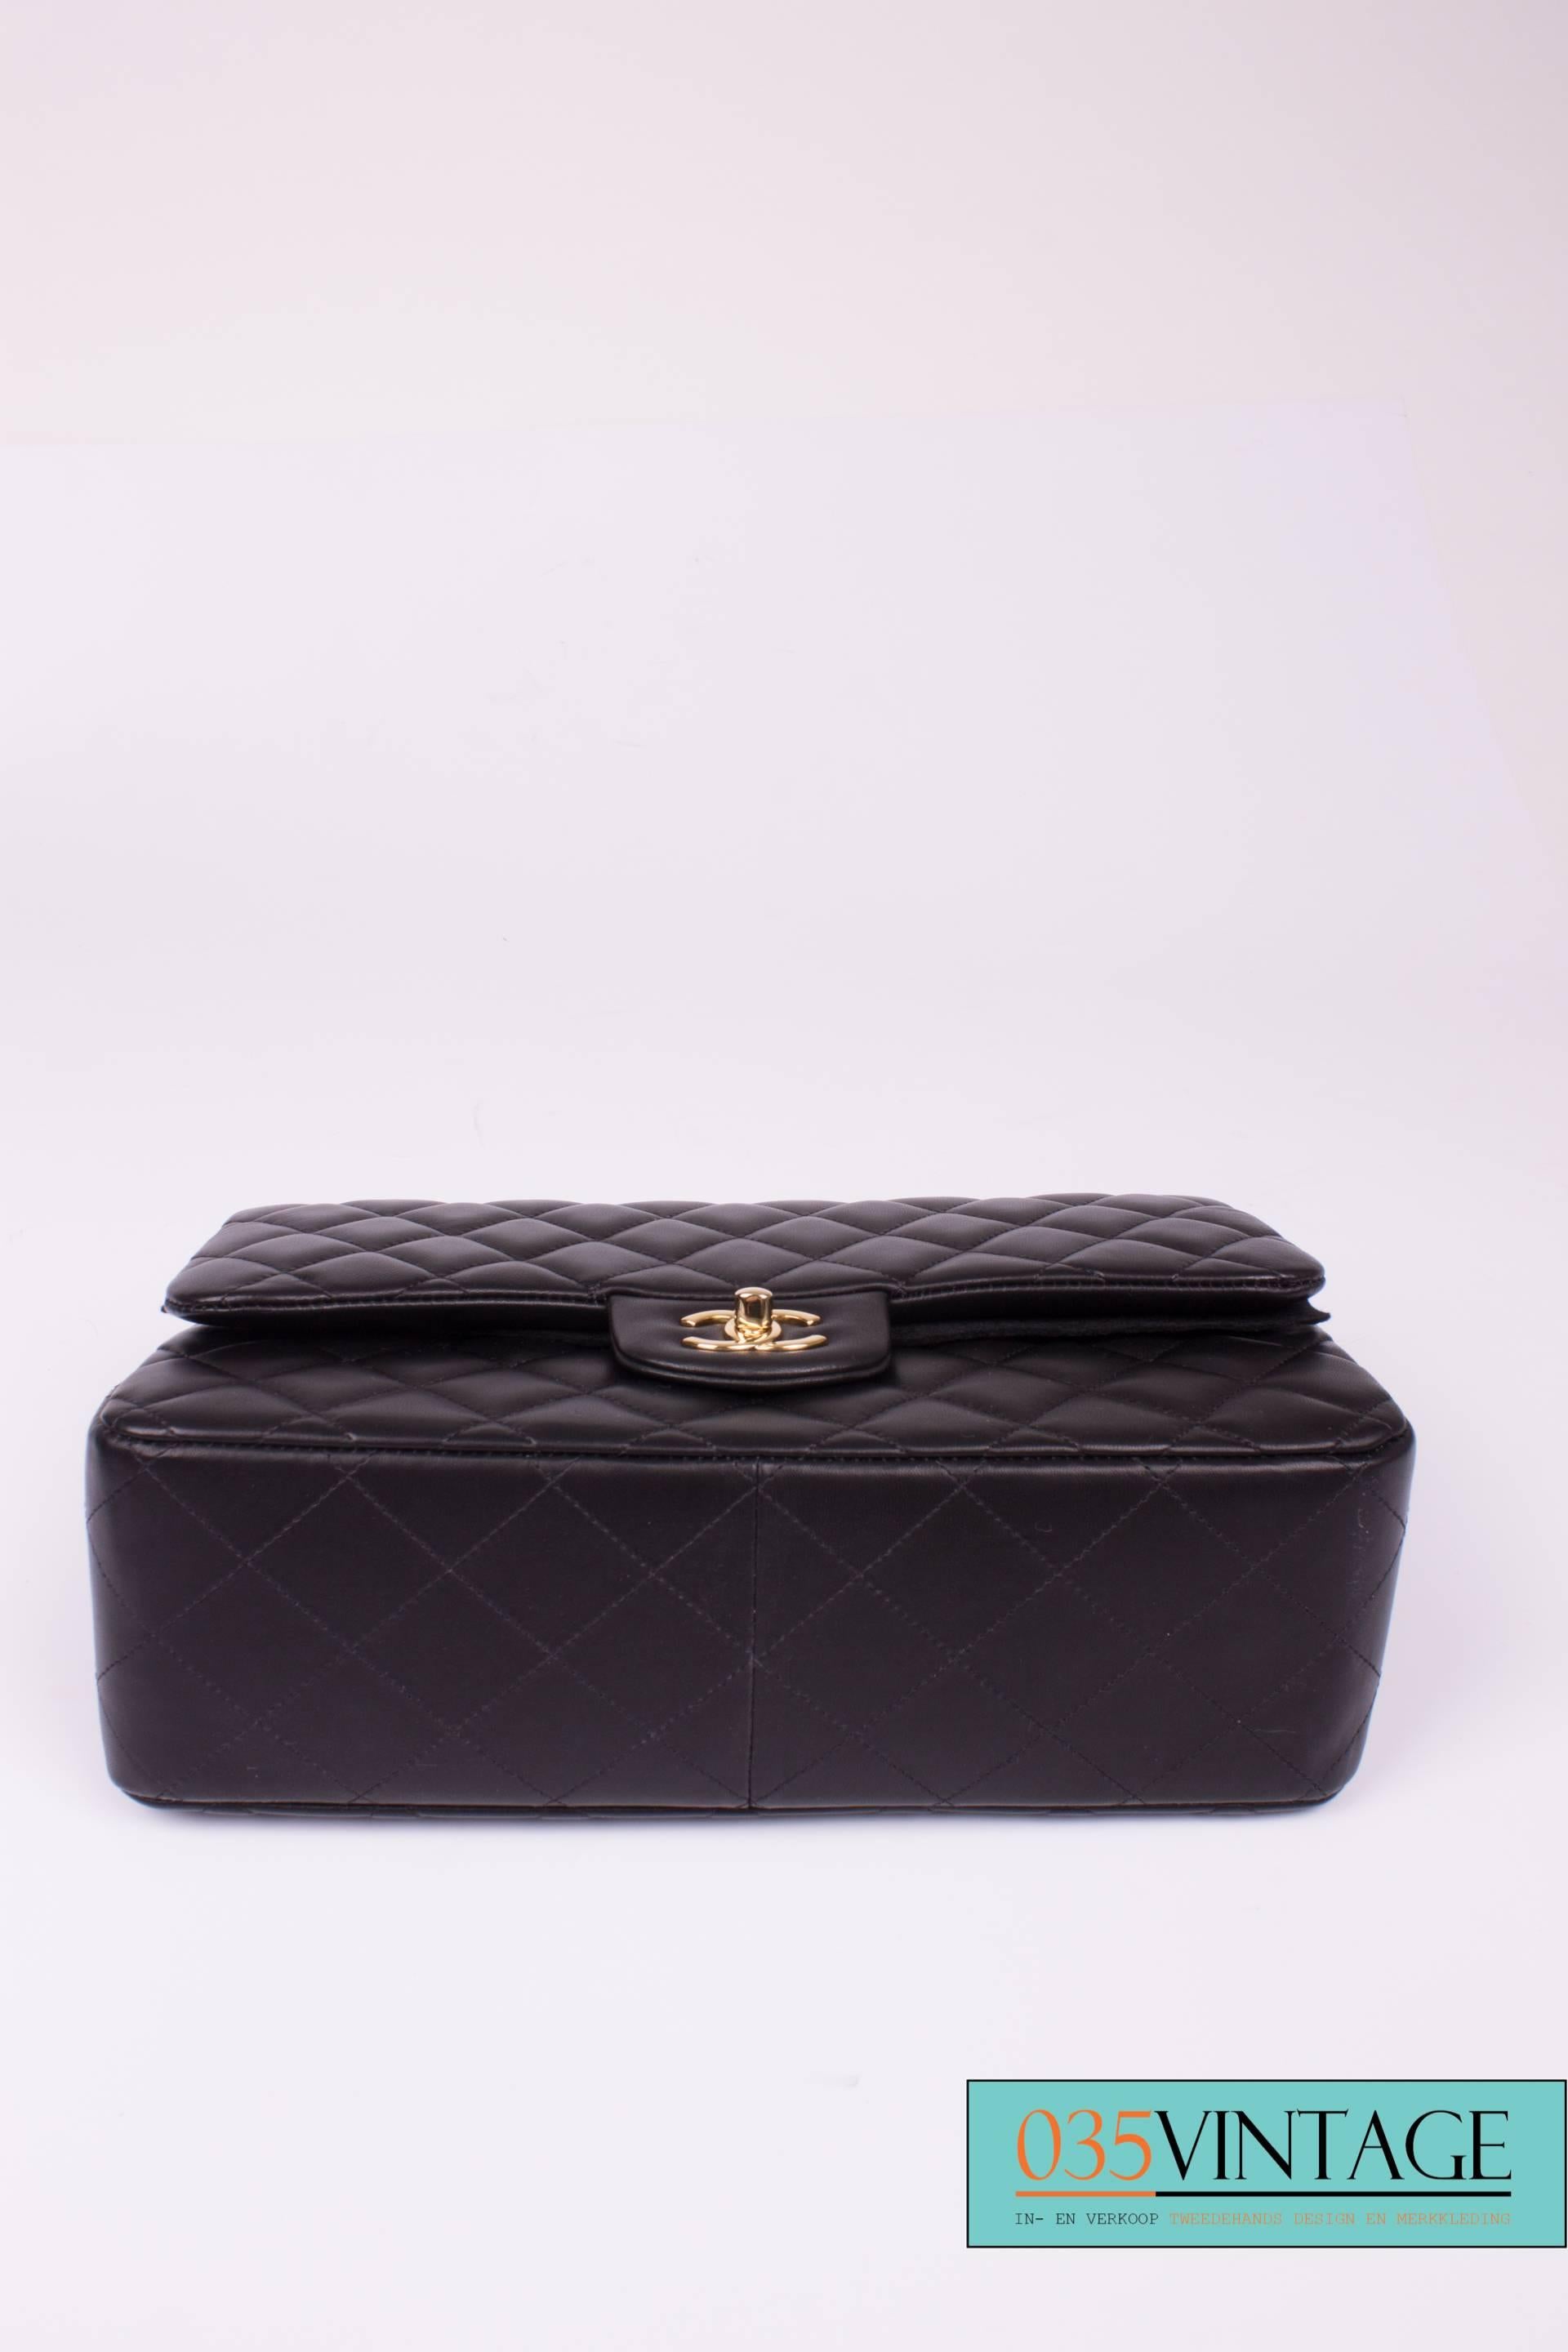 Women's Chanel Timeless Classic Double Flap Bag Jumbo - black leather - new! 